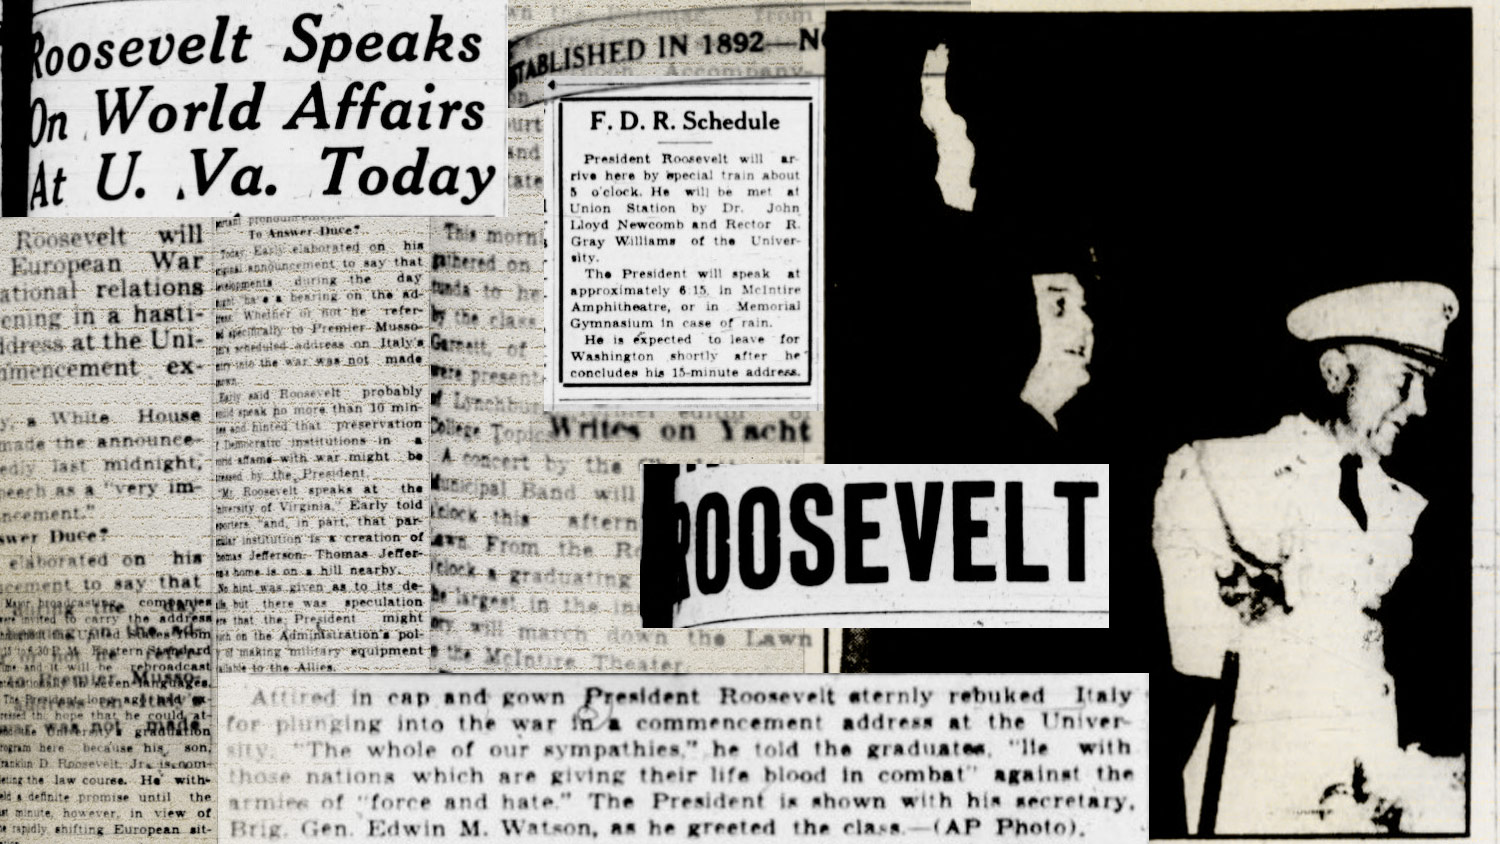 Newspaper clippings about Roosevelt